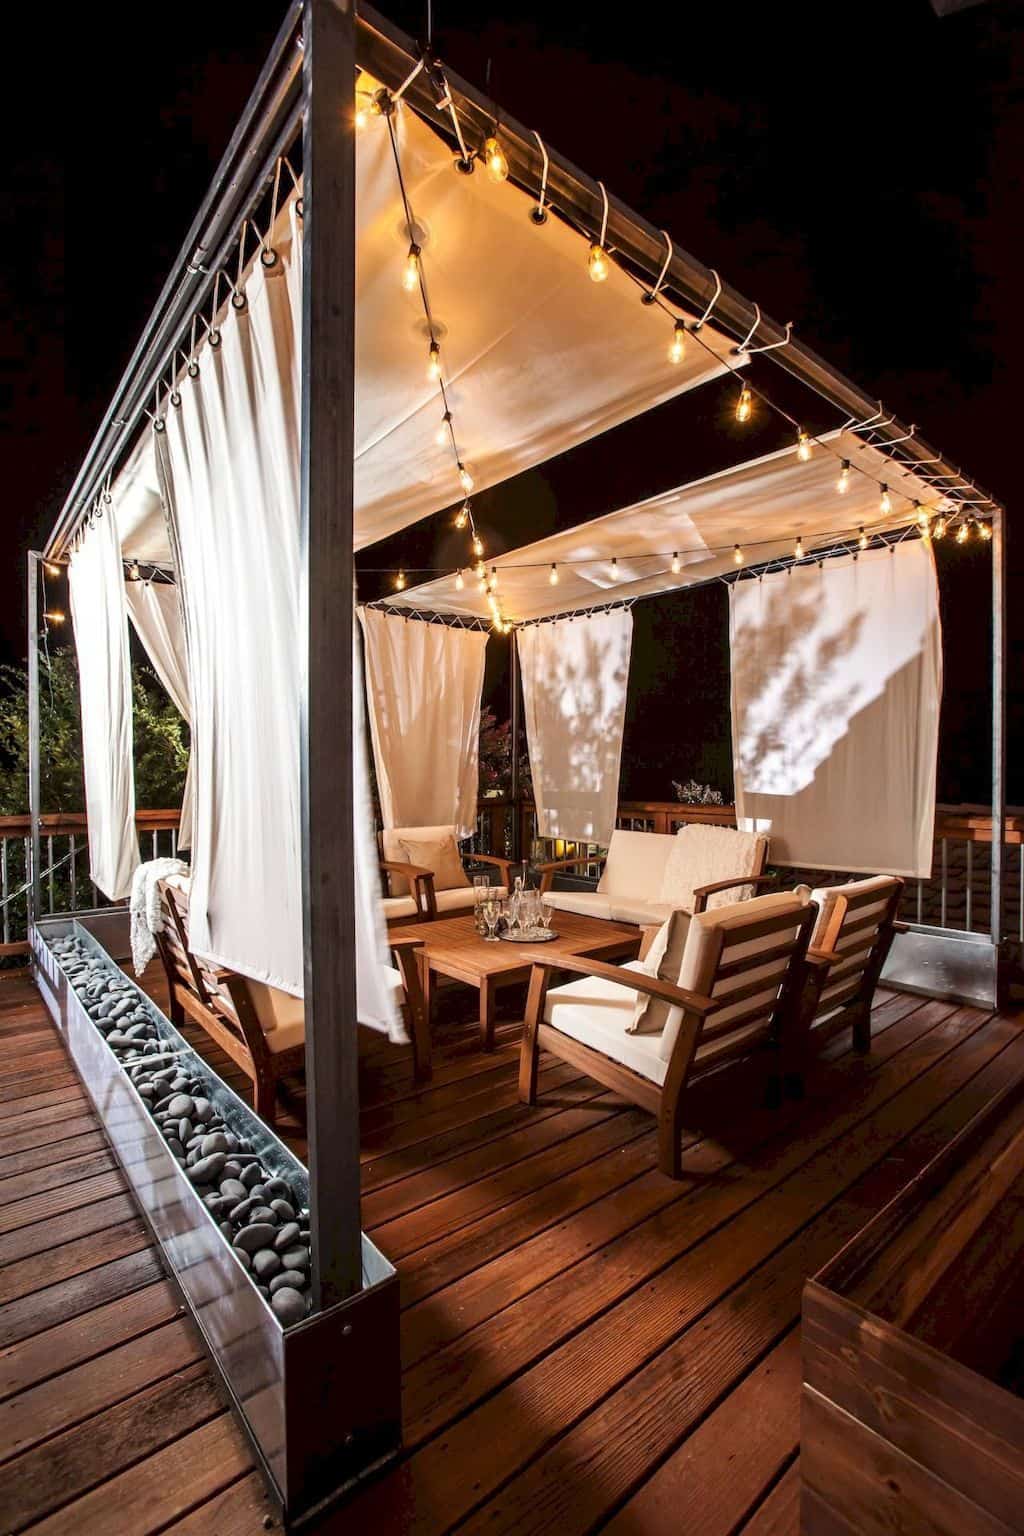 11 Backyard Pavilions Ideas You Didn’t Know You Needed: Curtains